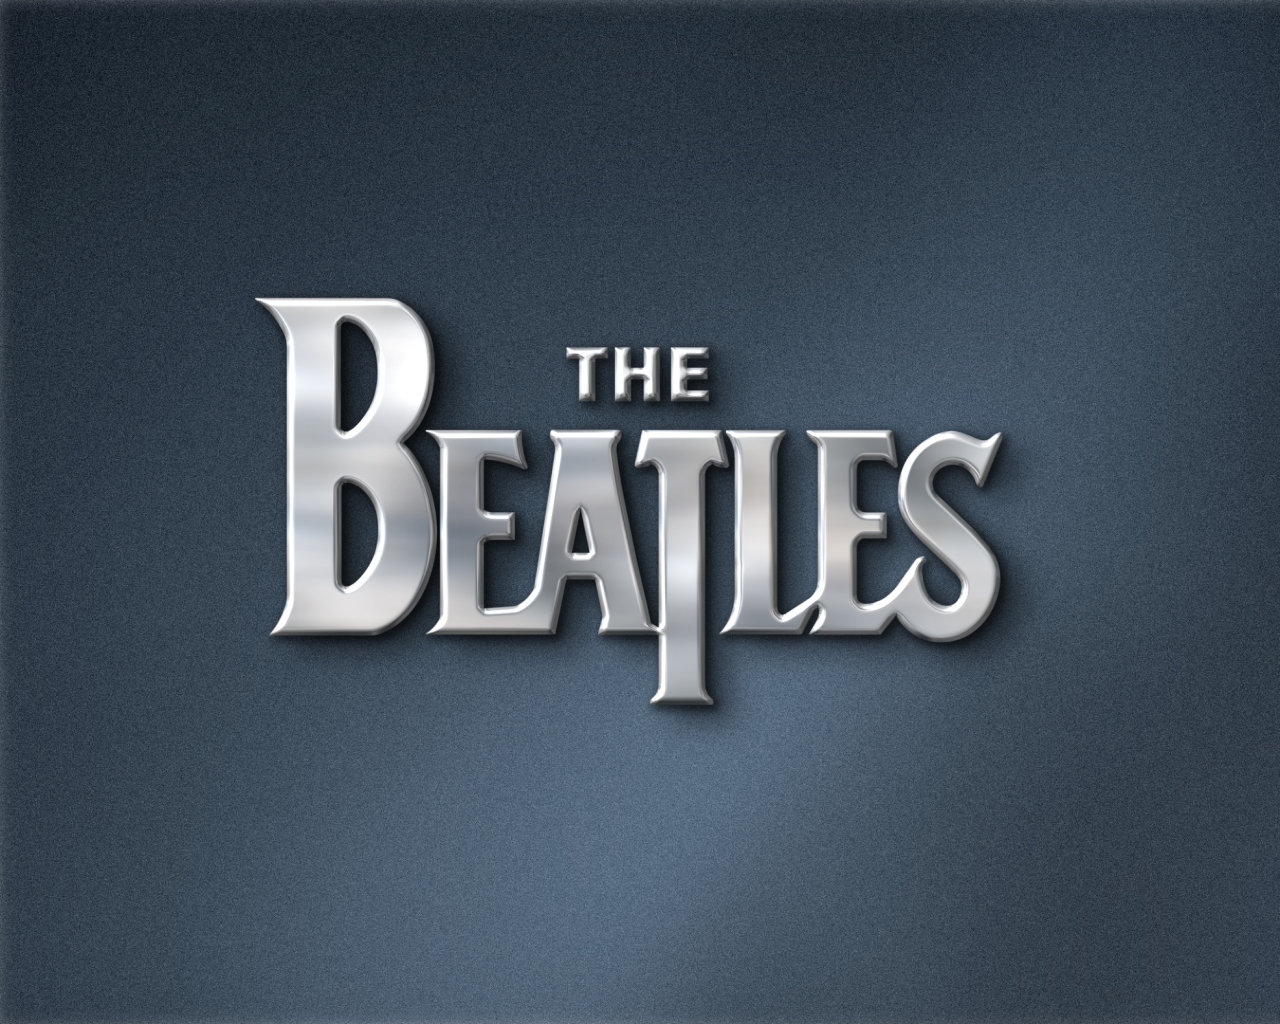 Download hd 1280x1024 The Beatles desktop background ID:271261 for free